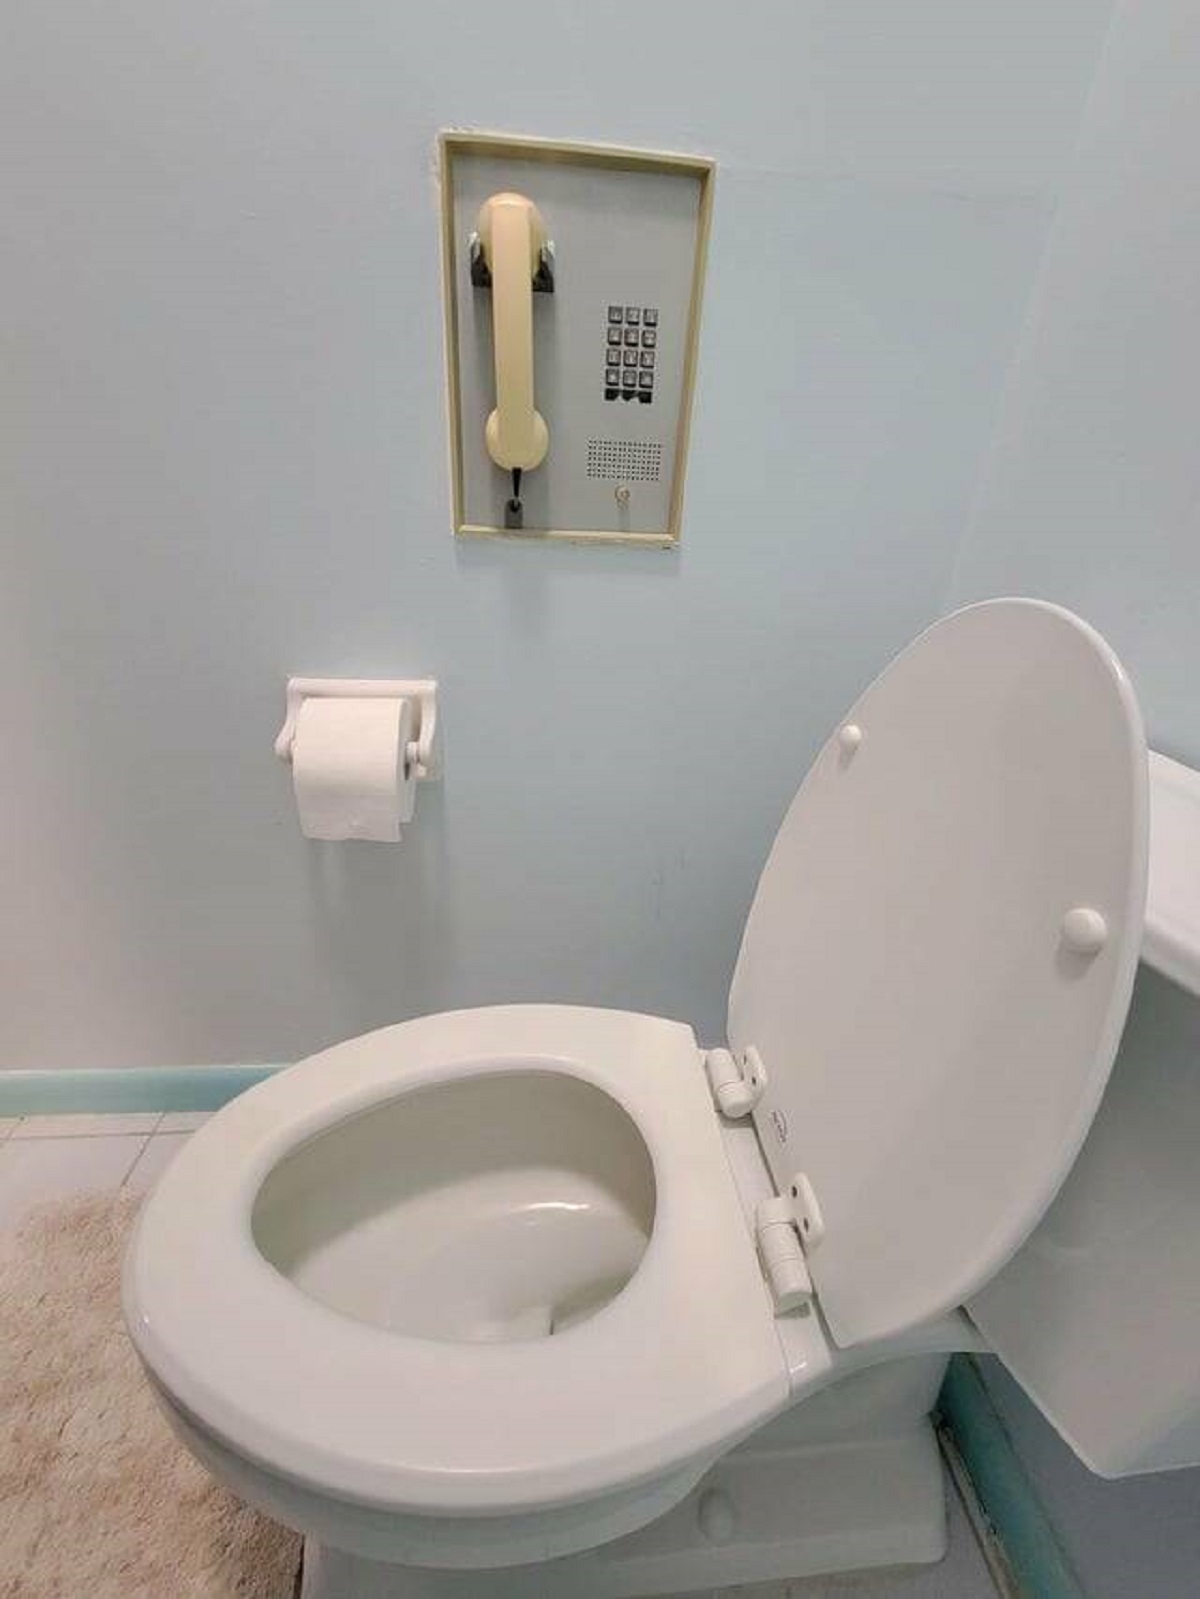 "My grandparent’s bathroom from the 1950s has a built in toilet phone"